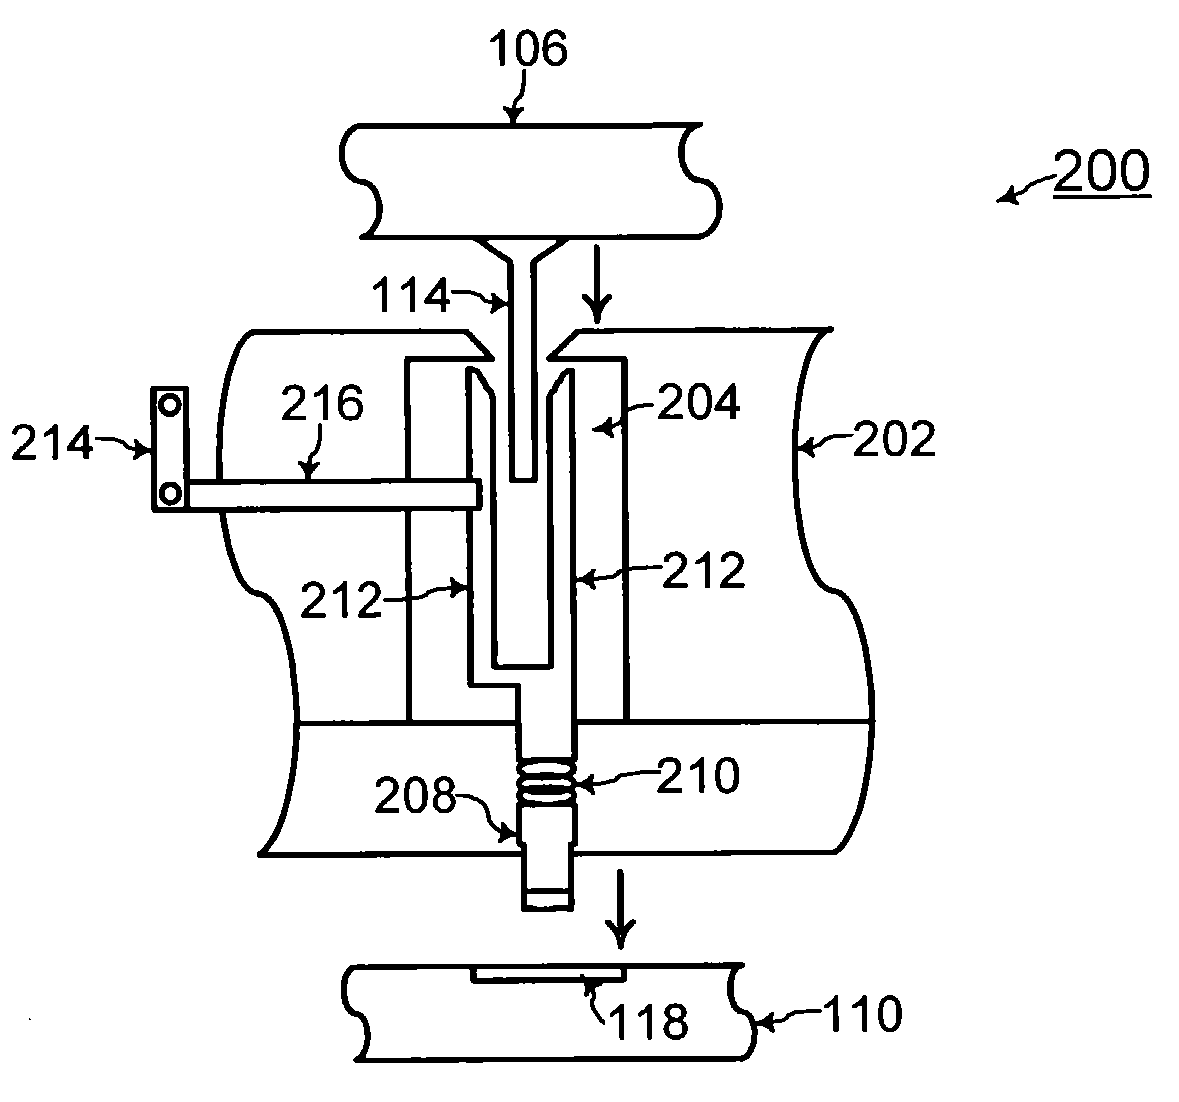 Compression mount and zero insertion force socket for IC devices